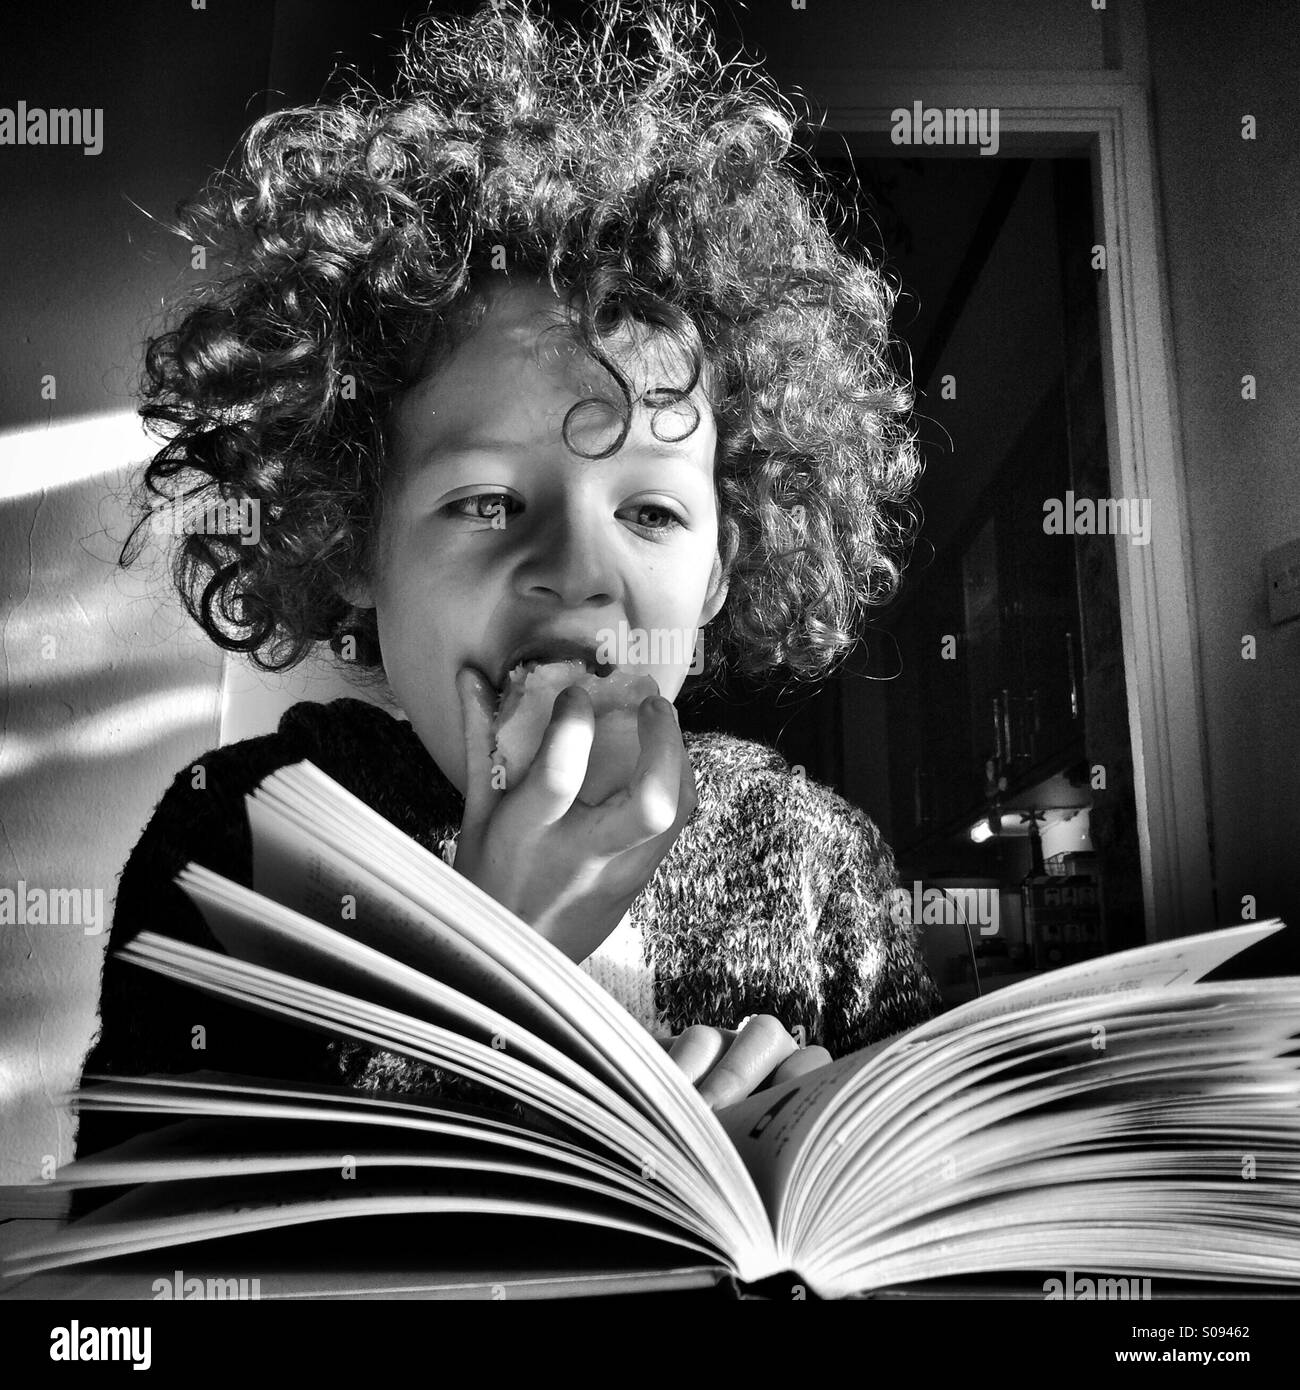 Girl eating an apple while reading a book. Stock Photo